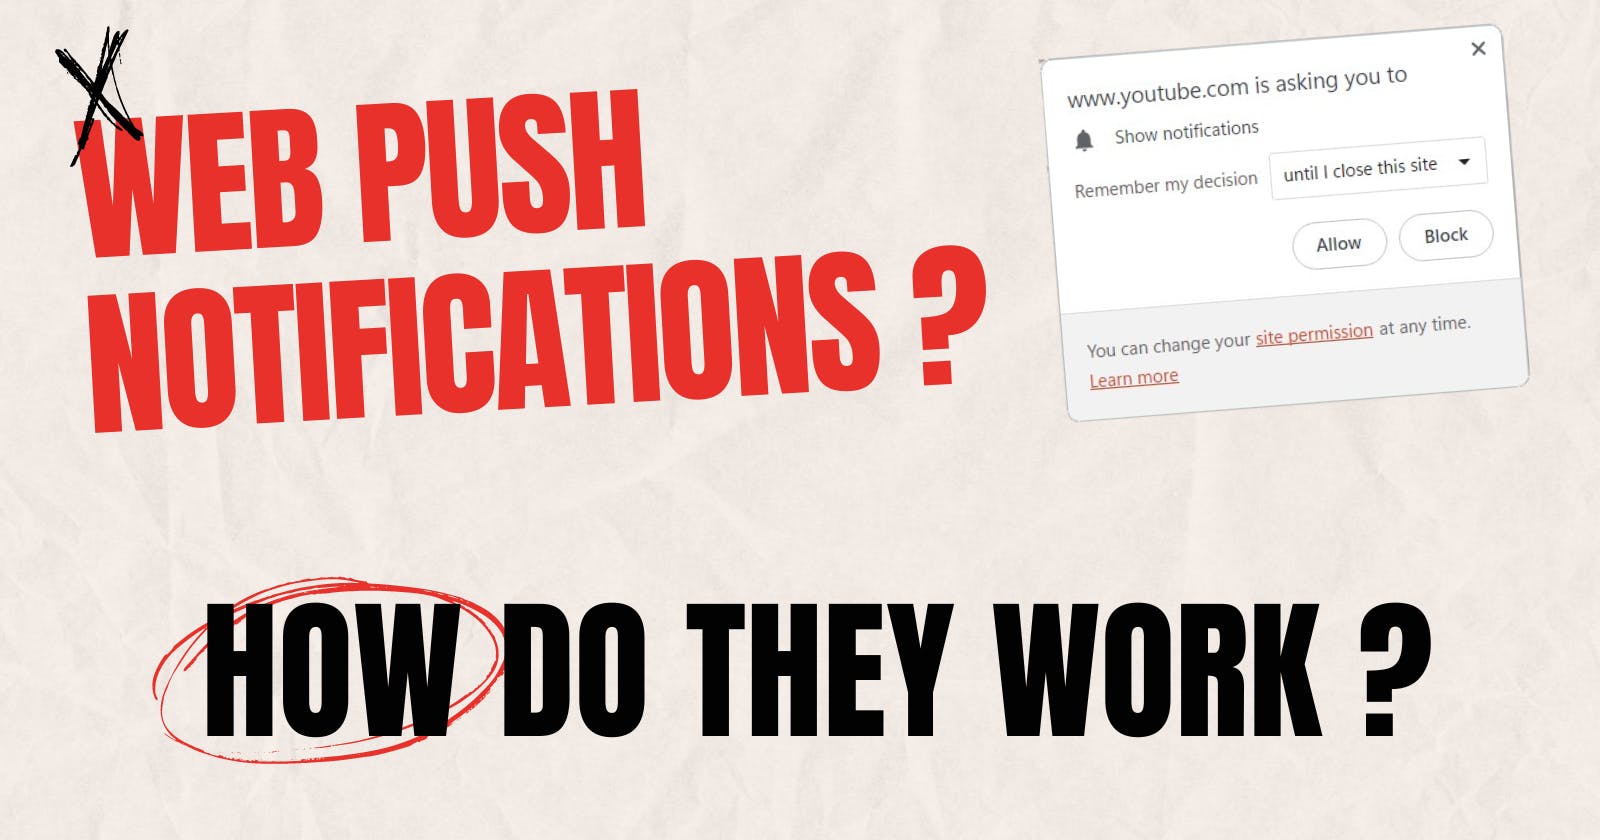 What are Web Push Notifications? And How do they work?